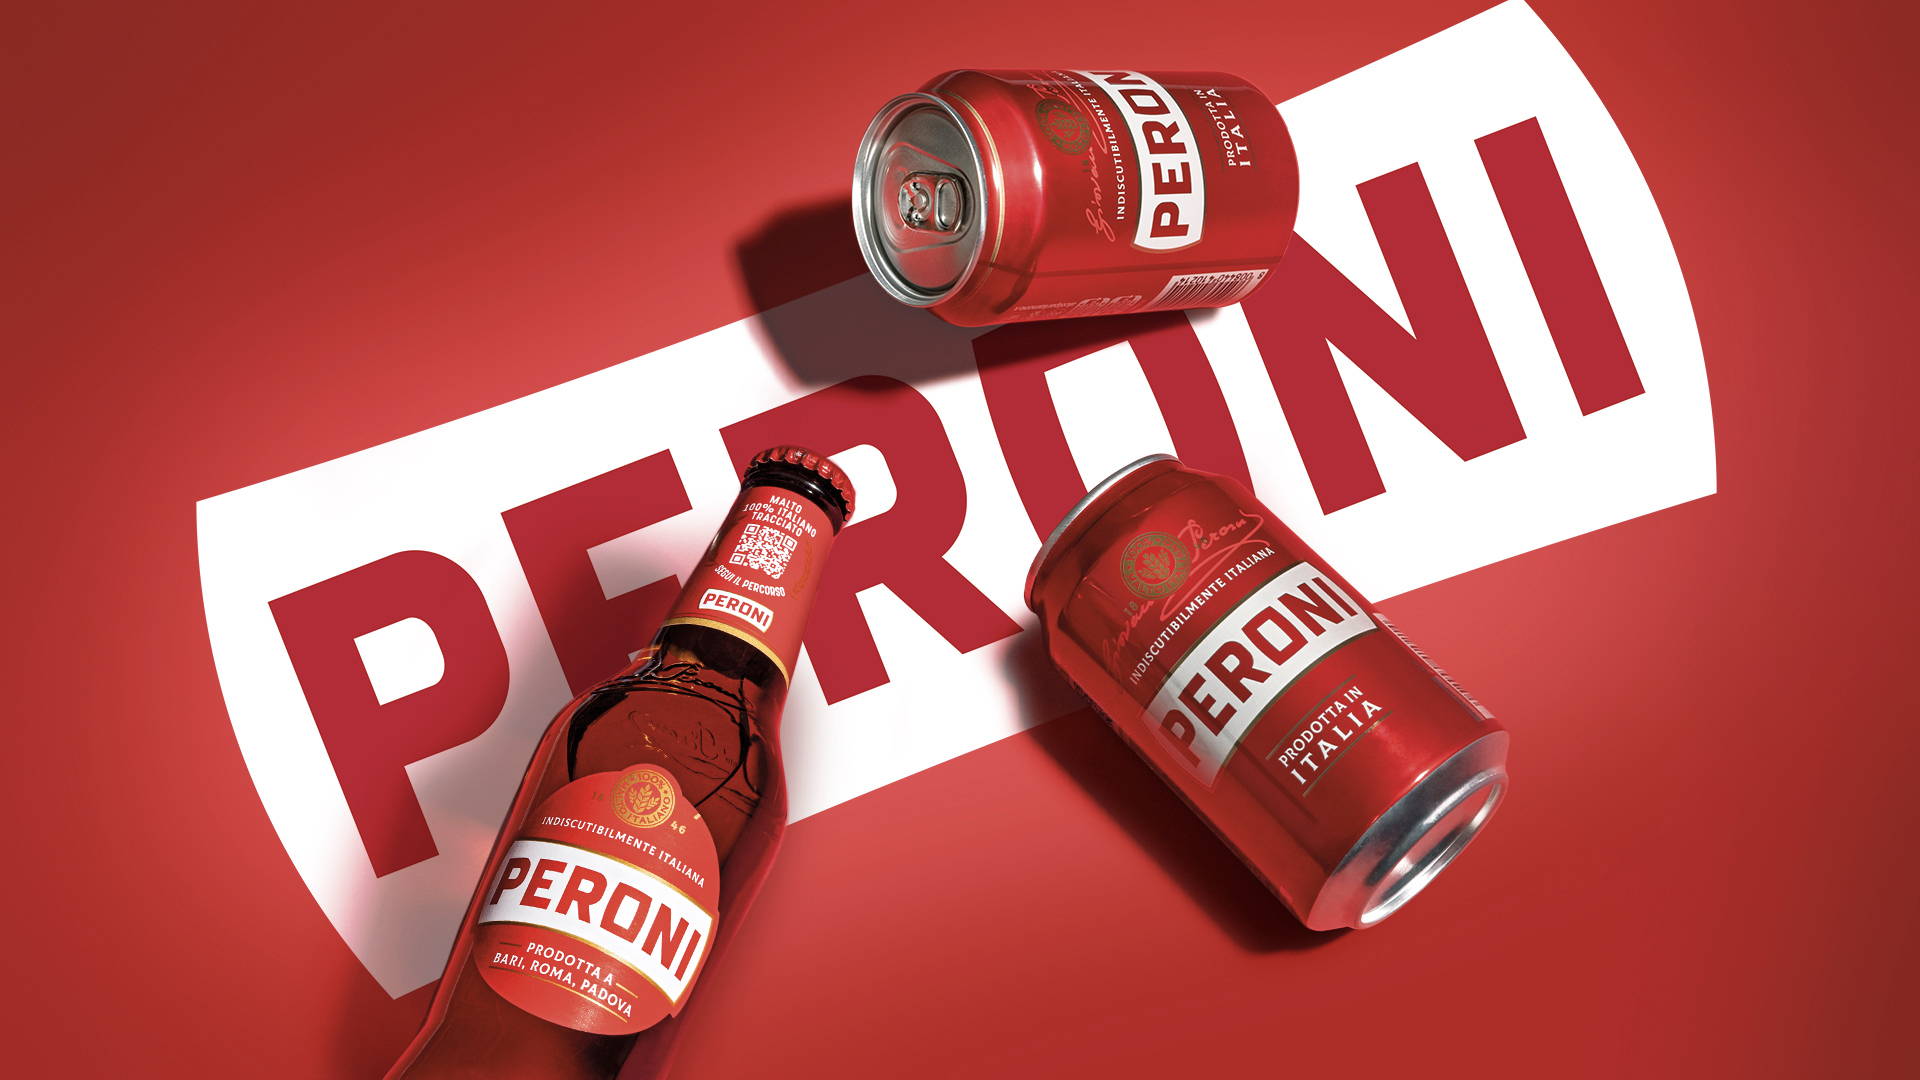 Featured image for The Iconic Italian Beer Peroni Gets a Classy New Look from Smith Lumen